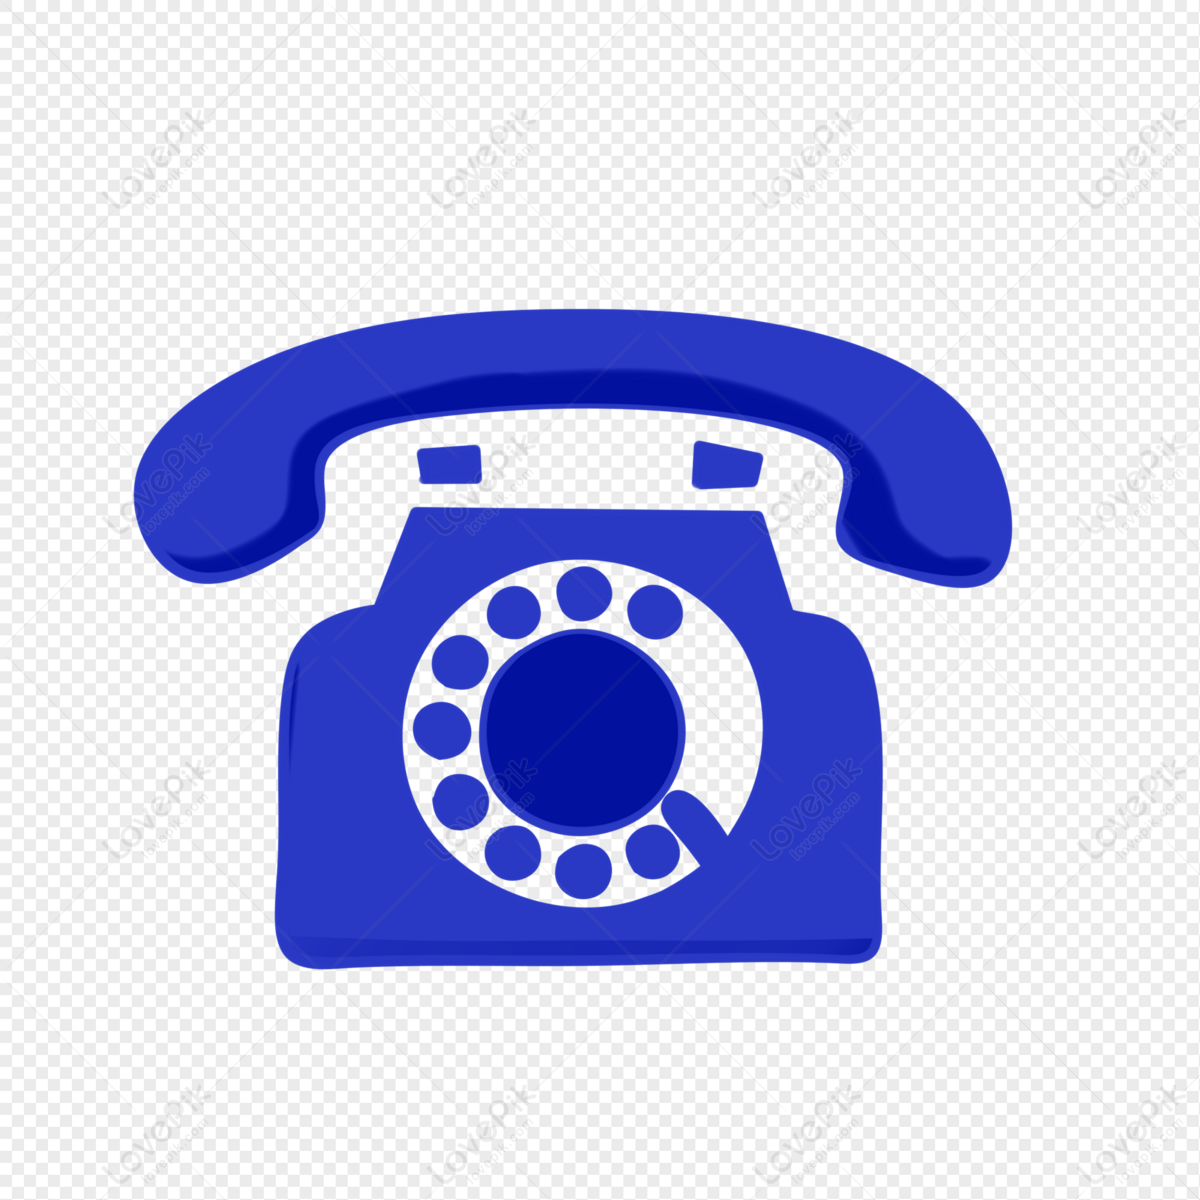 Telephone Cartoon Handpainted Wind Blue Phone PNG Transparent Image And  Clipart Image For Free Download - Lovepik | 401009837